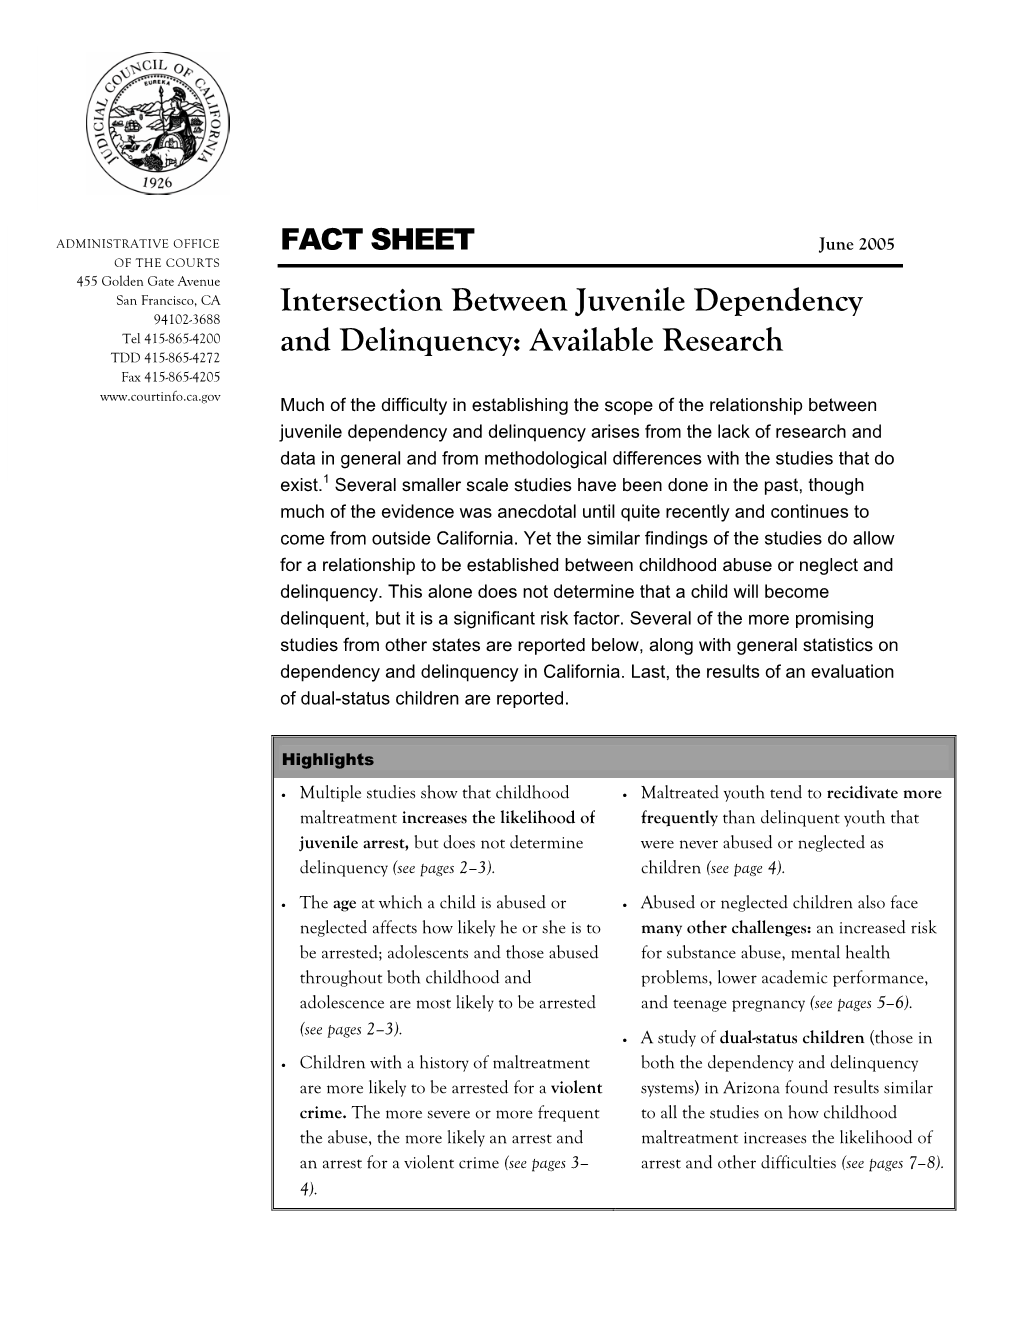 Intersection Between Juvenile Dependency and Delinquency: Available Research Page 2 of 9